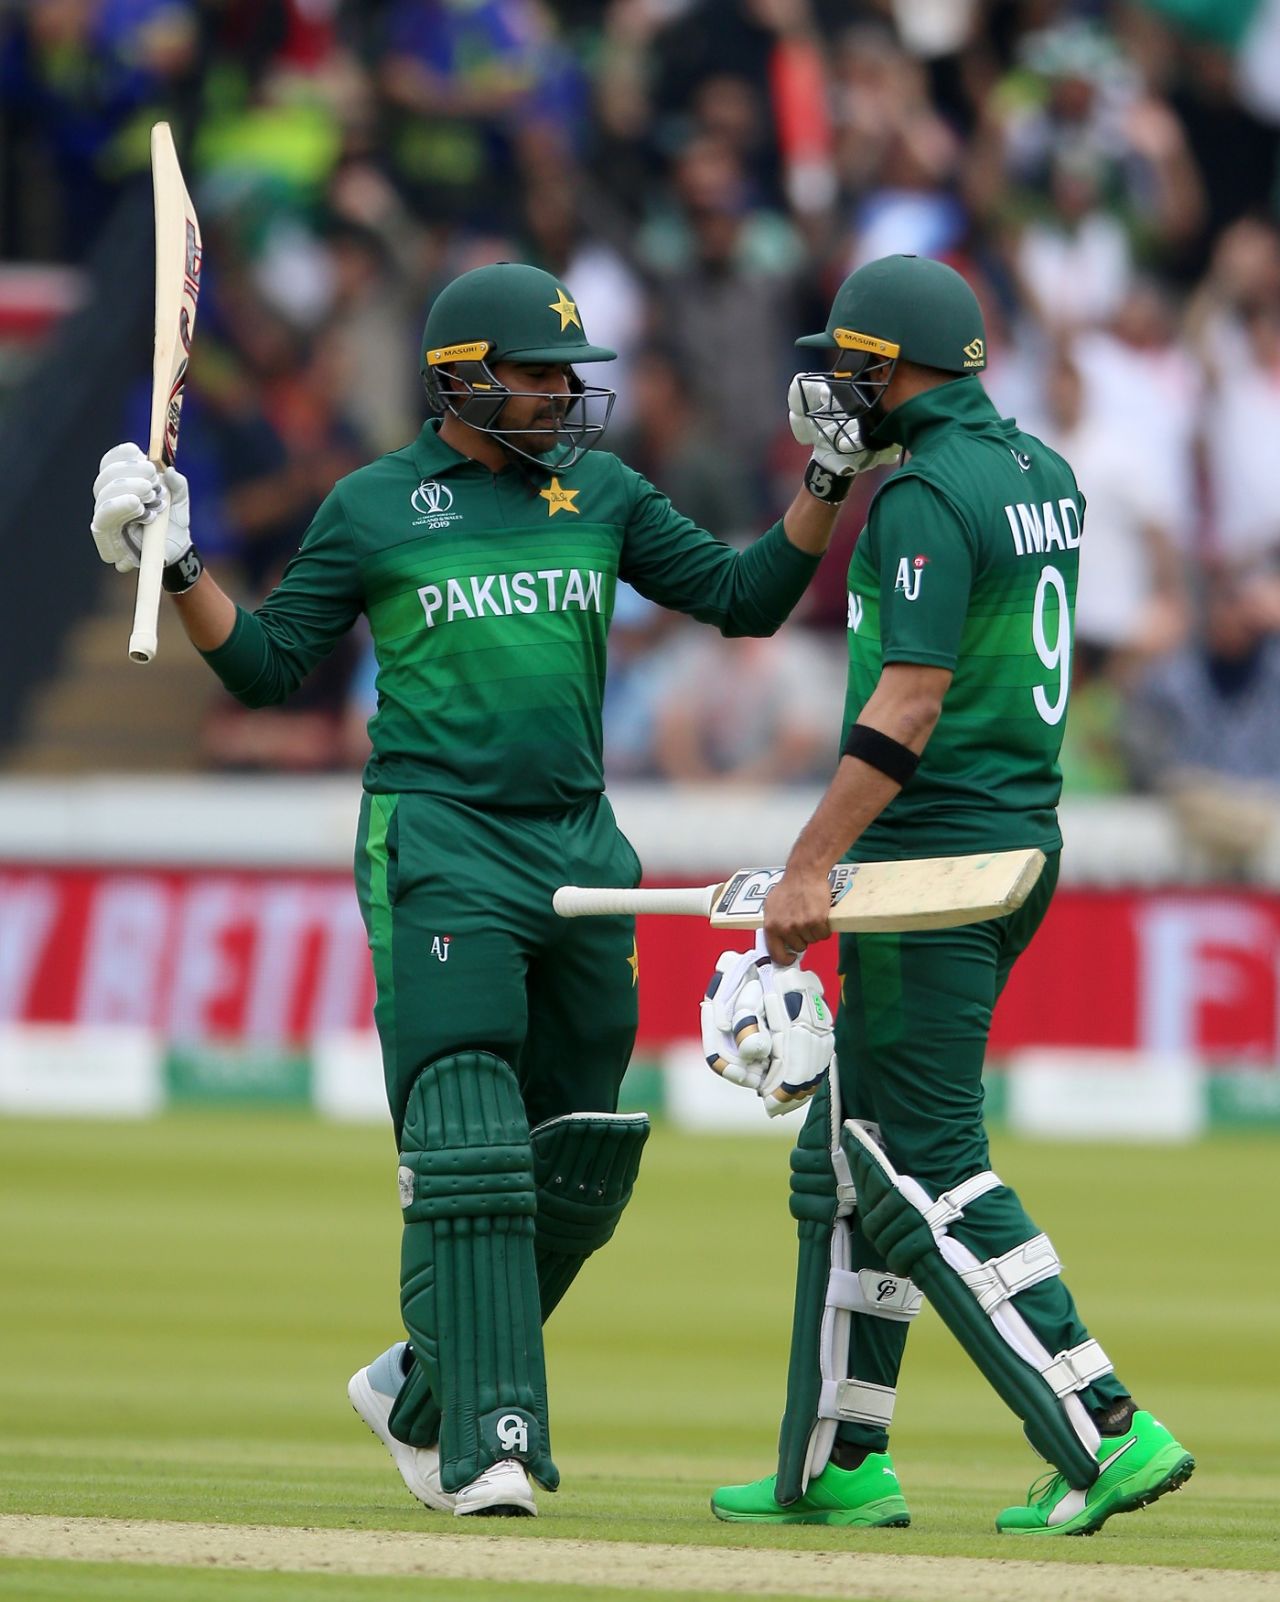 Haris Sohail celebrates reaching his half century with Imad Wasim, Pakistan v South Africa, World Cup 2019, Lords, June 7, 2019